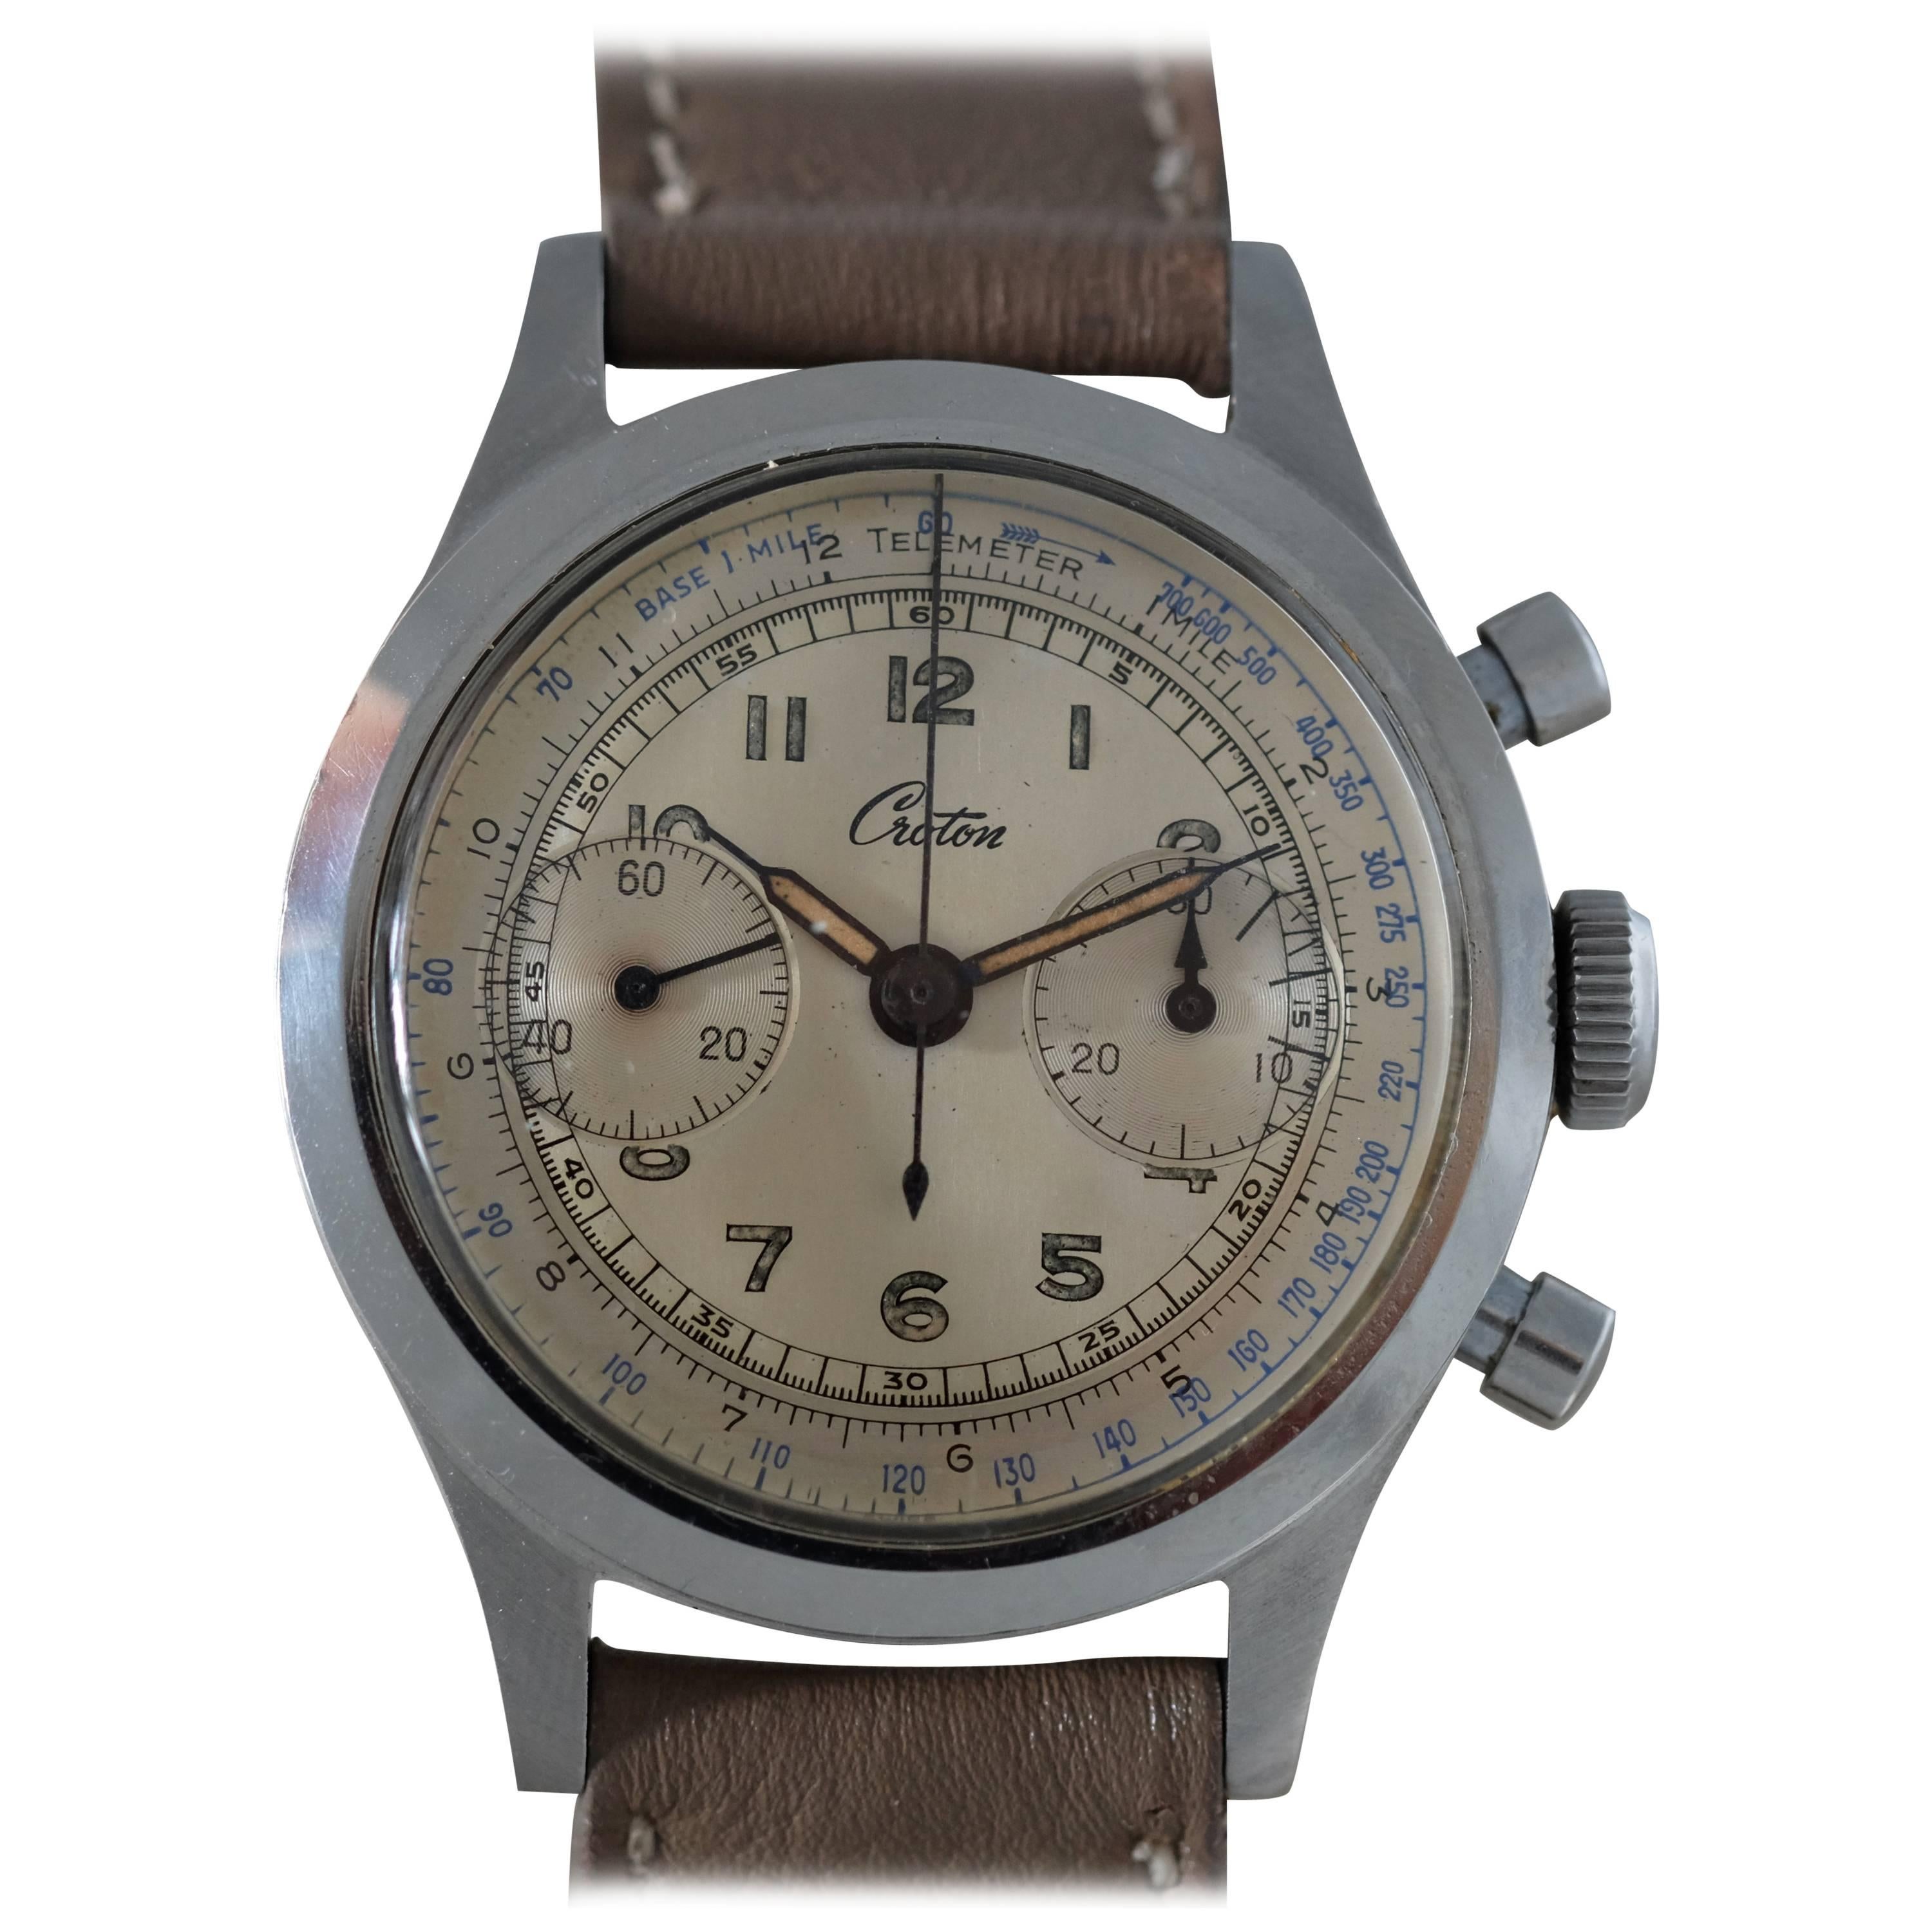 Croton Stainless Steel Chronograph Tachometer Telemeter Scale Wristwatch